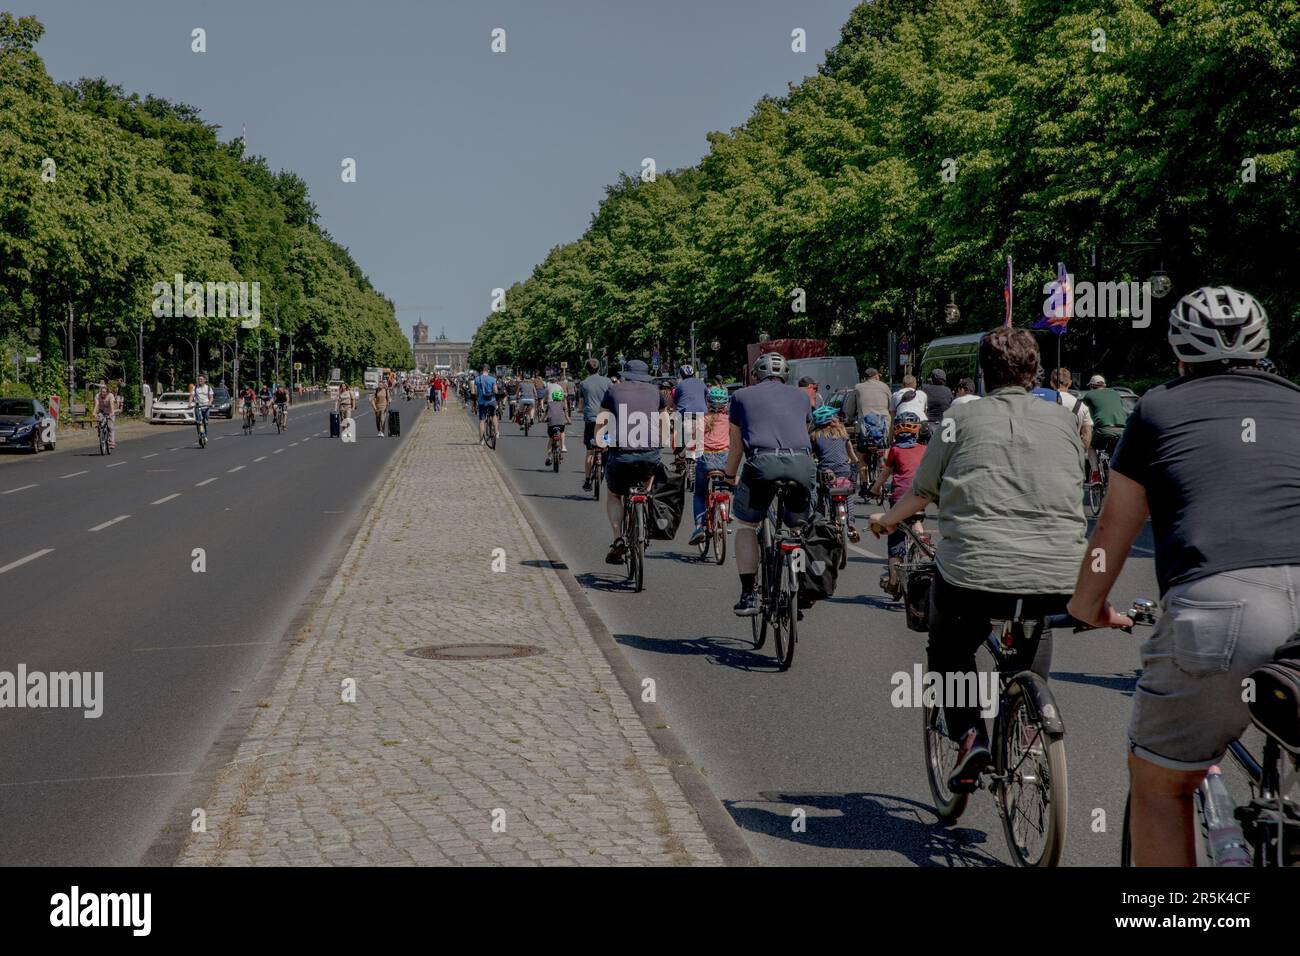 June 4, 2023, Berlin, Germany: Thousands of cyclists participated in the annual bike protest, the Sternfahrt, in Berlin on June 4, 2023. Participants called for protected bike lanes and safer streets around schools. Numerous roads in and around Berlin were closed to car traffic to accommodate the event, including sections of freeways. The action caused significant disruptions for motorists throughout the city. All routes converged at the Victory Column in Berlin's Tiergarten Park. Road closures were also implemented on the A113/A100 and A115 (AVUS) freeways. The General German Bicycle Club (AD Stock Photo